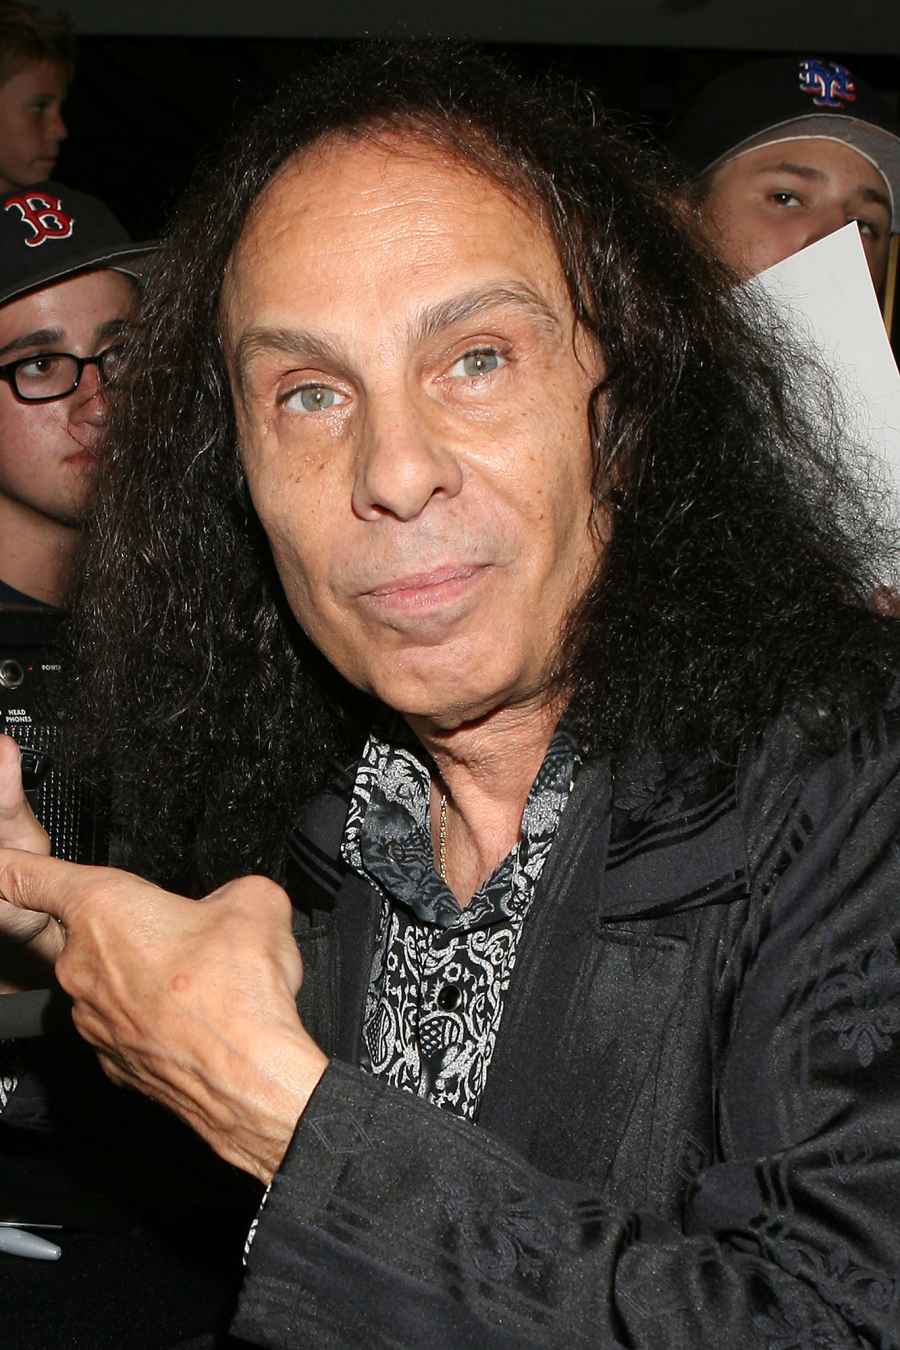 Stars We Lost in 2010 Ronnie James Dio